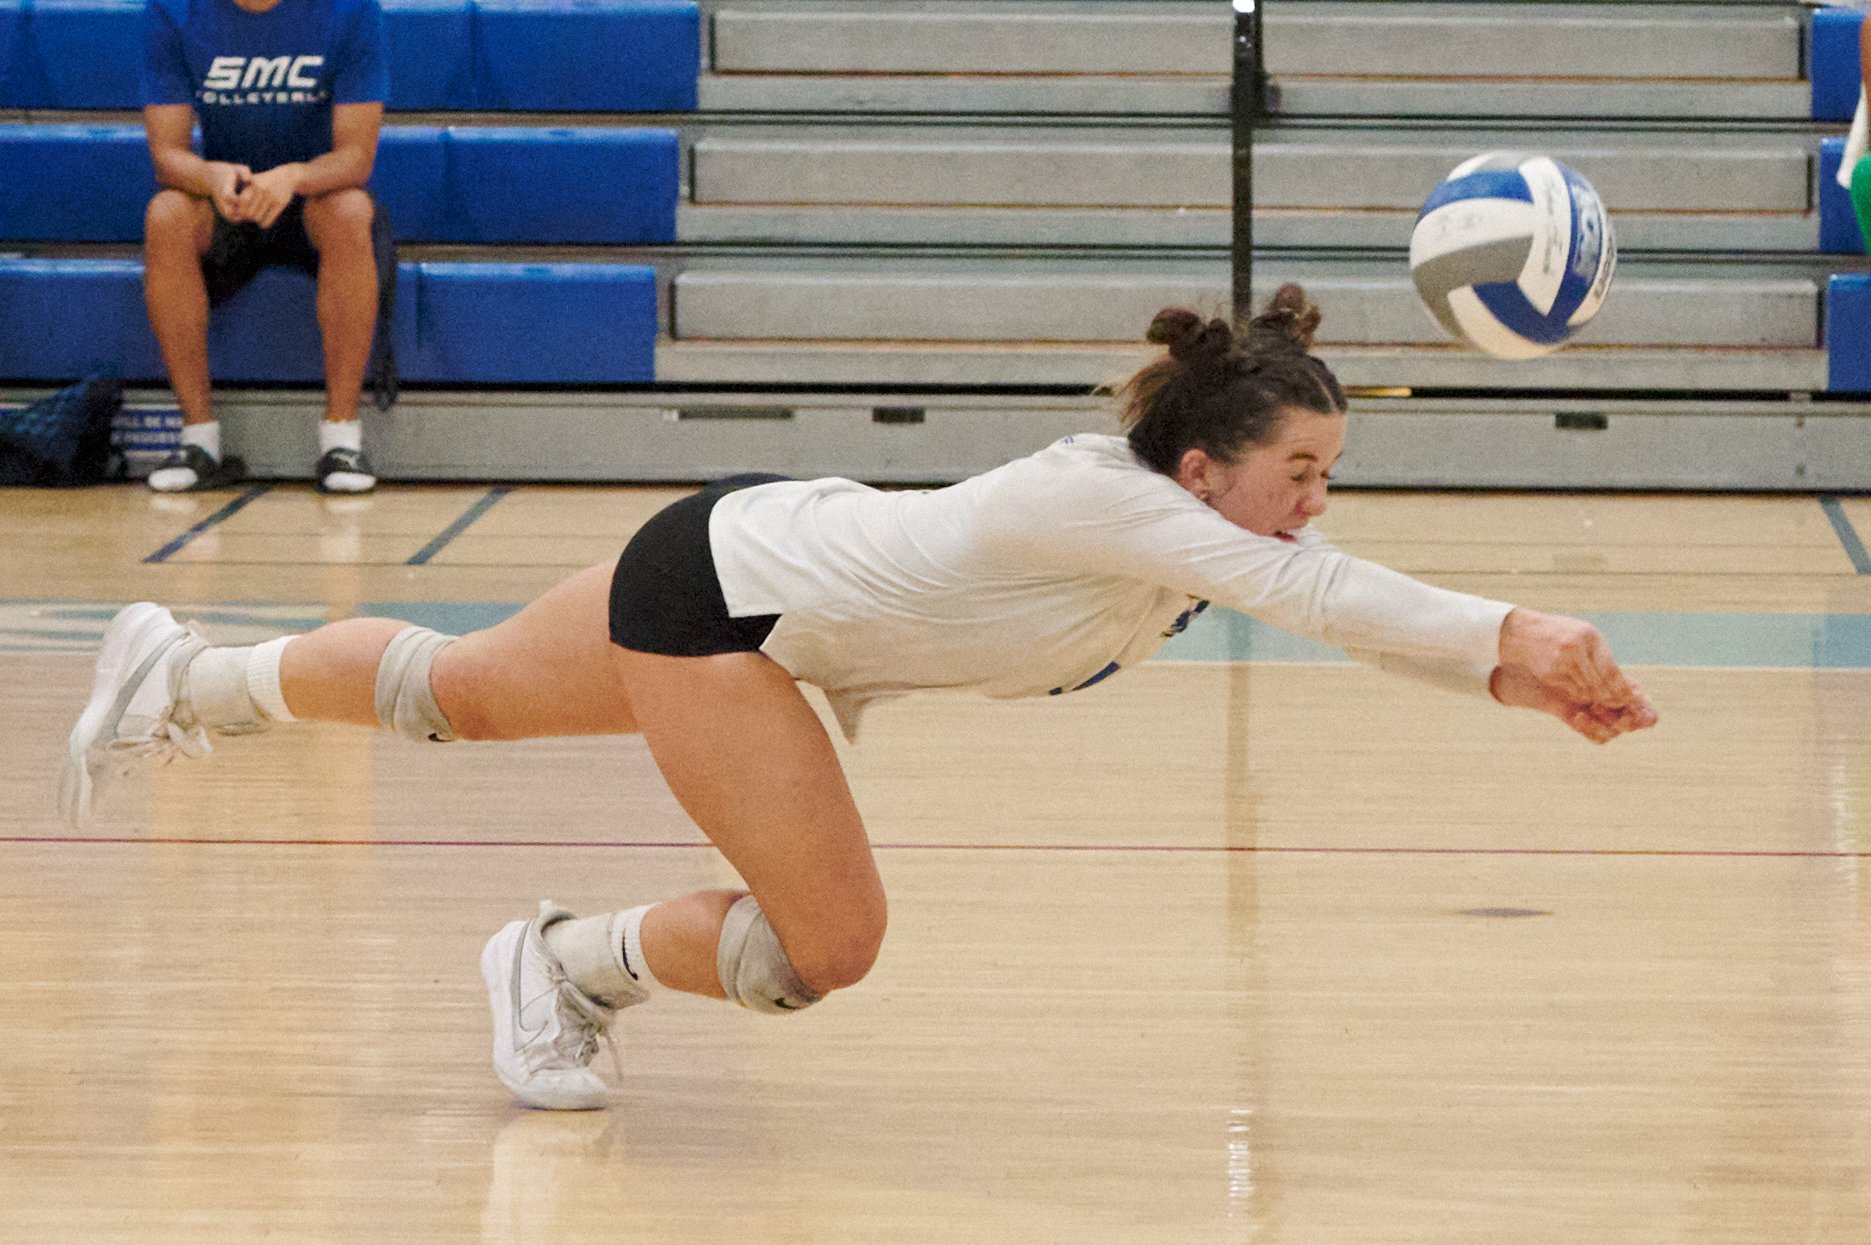  Santa Monica College Corsairs' Halle Anderson dives for the ball during the women's volleyball match against the Moorpark College Raiders on Friday, Sept. 23, 2022, at the Corsair Gym in Santa Monica, Calif. The Corsairs won 3-2. (Nicholas McCall | 